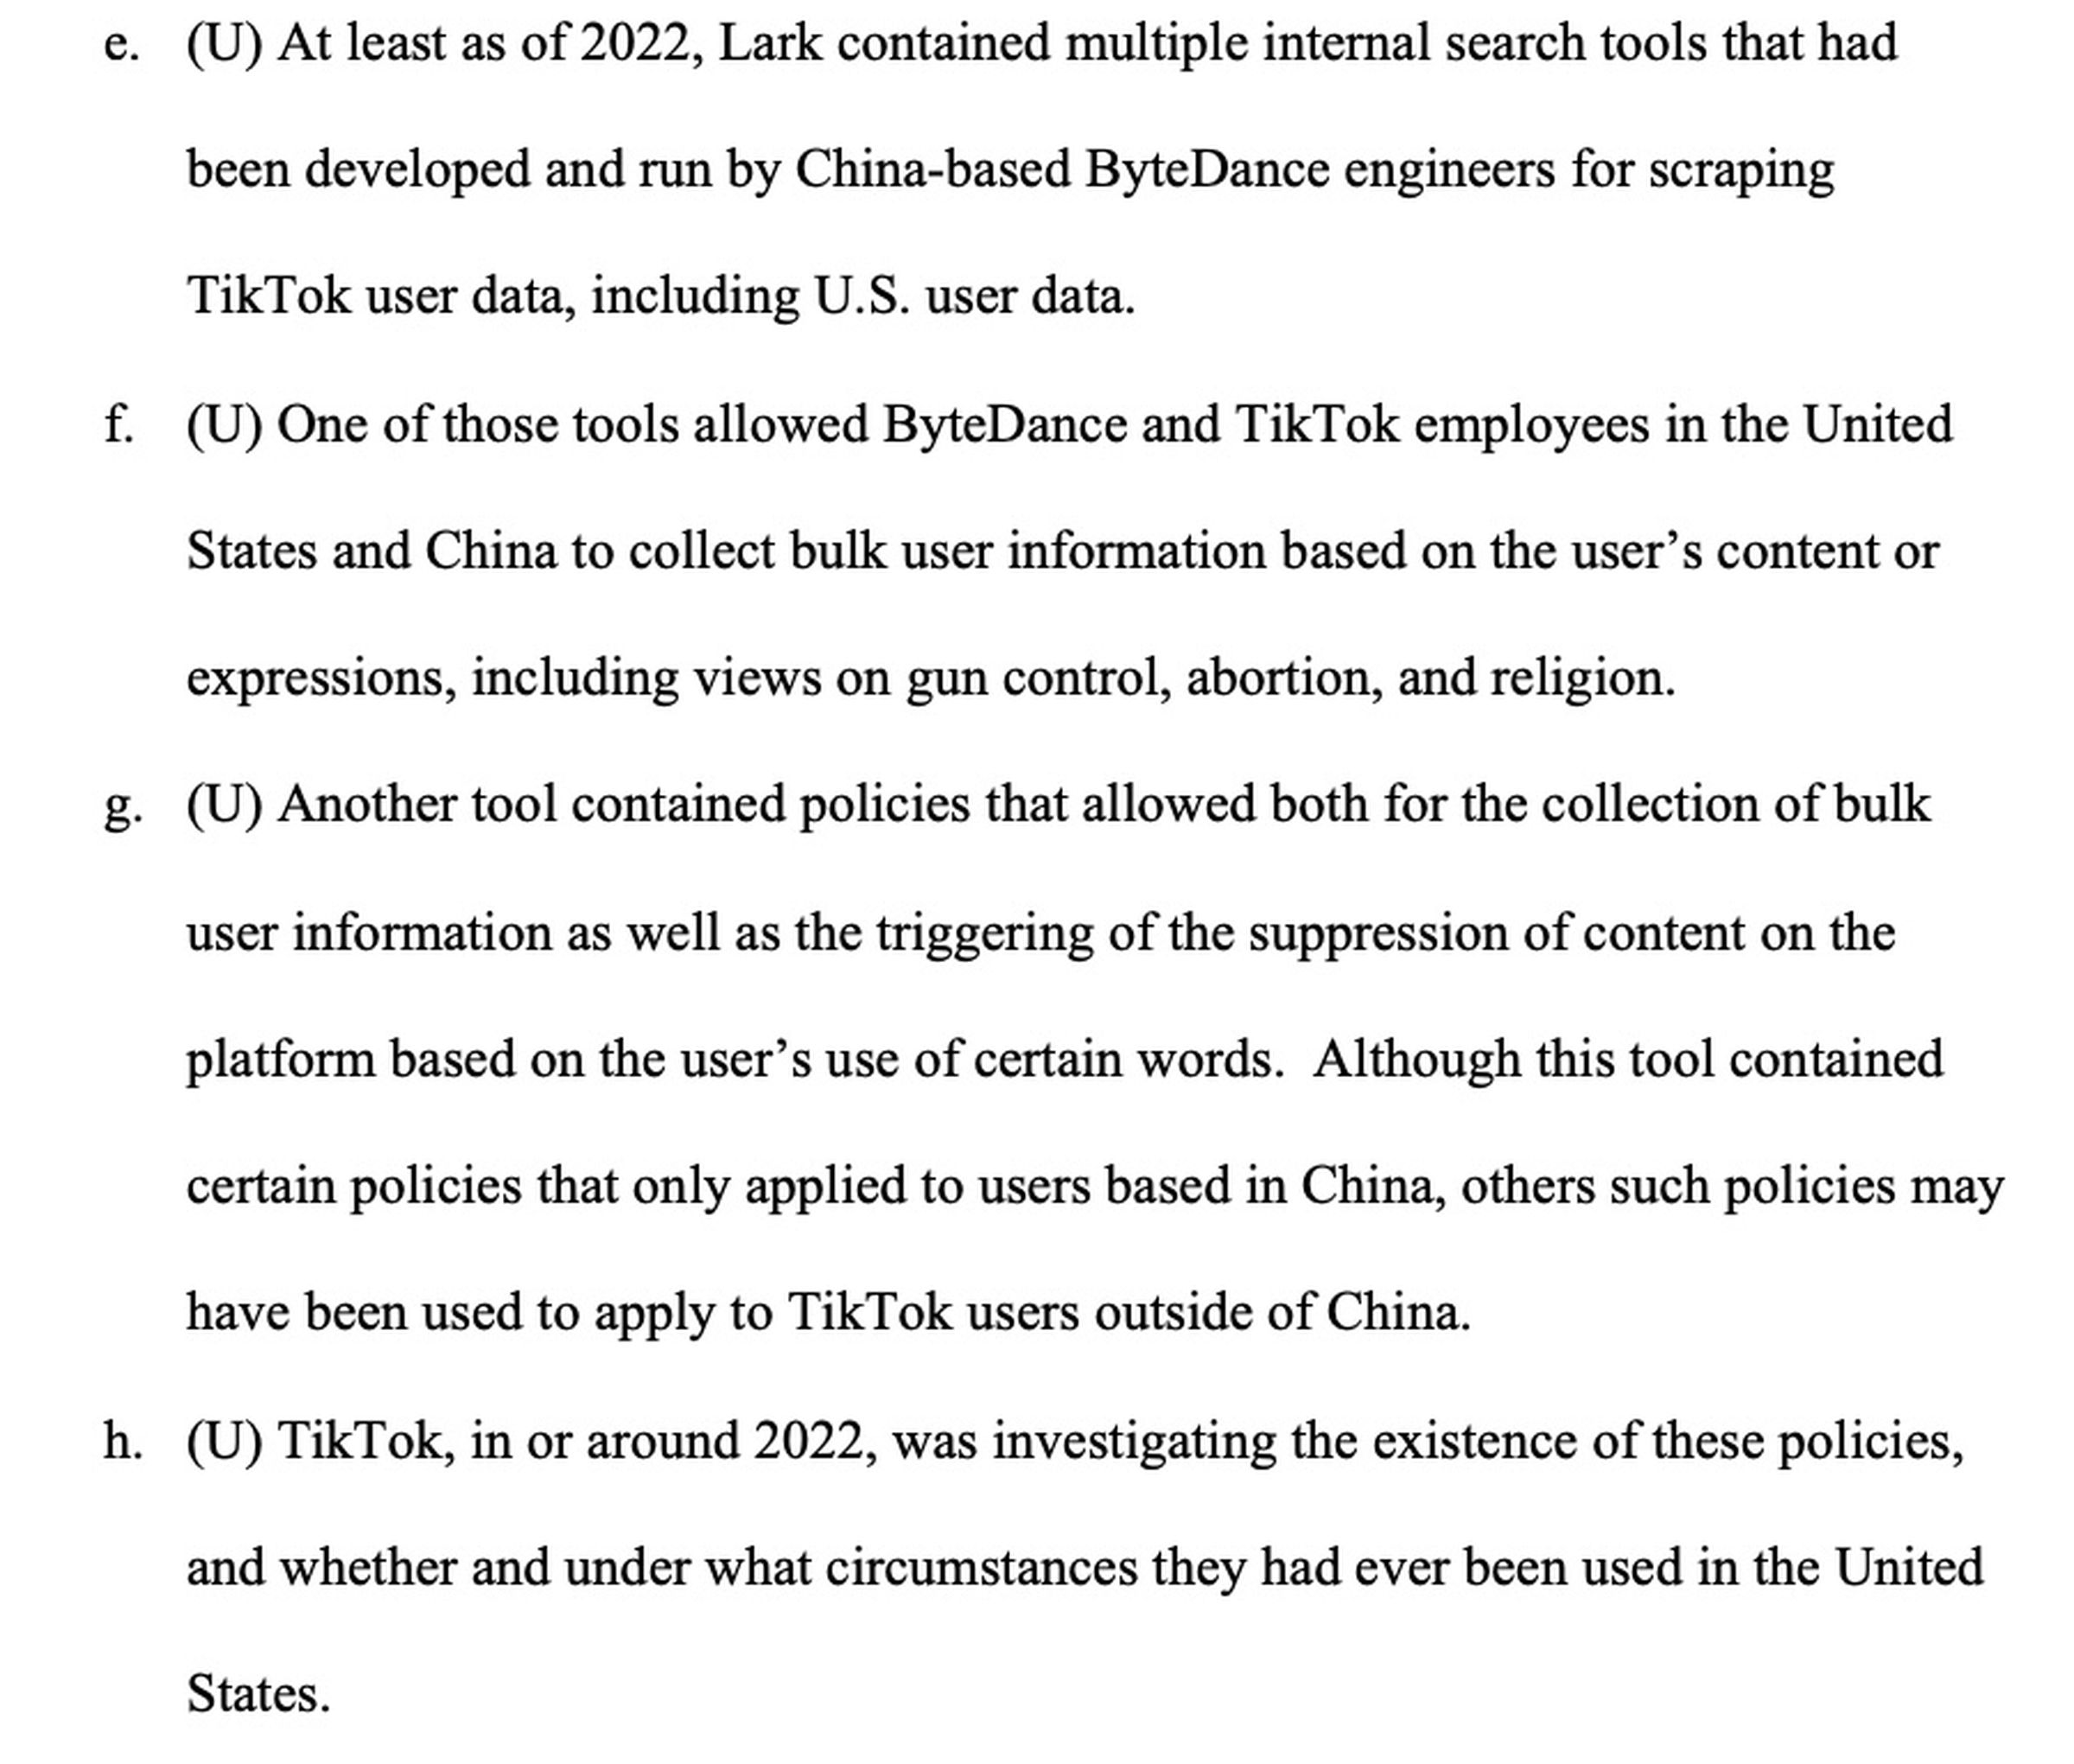 At least as of 2022, Lark contained multiple internal search tools that had been developed and run by China-based ByteDance engineers for scraping TikTok user data, including U.S. user data. f. (U) One of those tools allowed ByteDance and TikTok employees in the United States and China to collect bulk user information based on the user’s content or expressions, including views on gun control, abortion, and religion. 